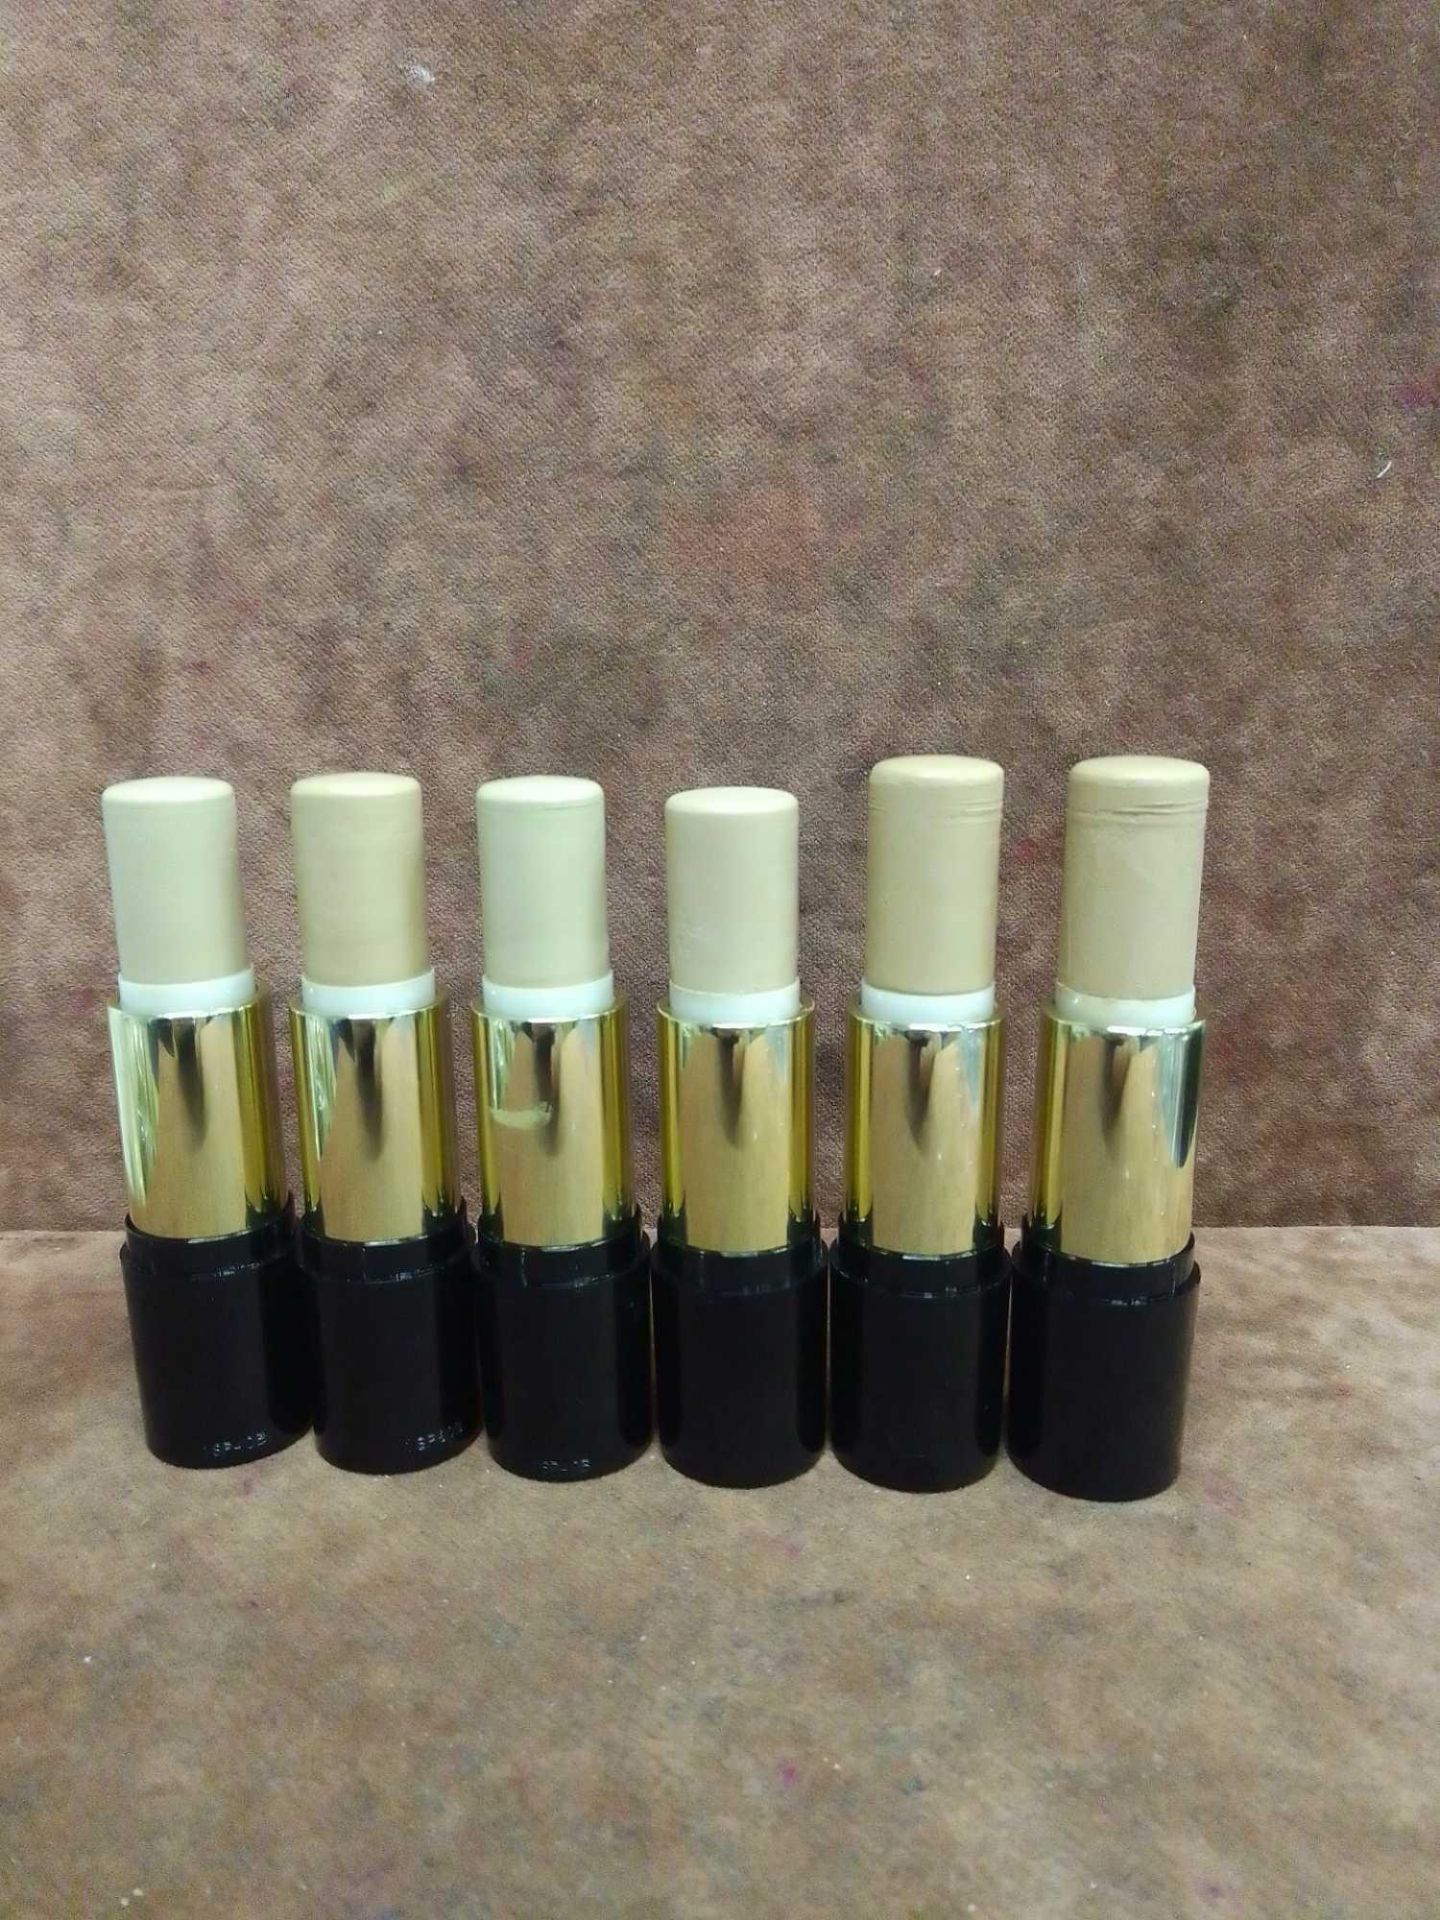 (Jb) RRP £180 Lot To Contain 6 Testers Of Lancome Teint Idole Ultra Wear Foundation Sticks In Assort